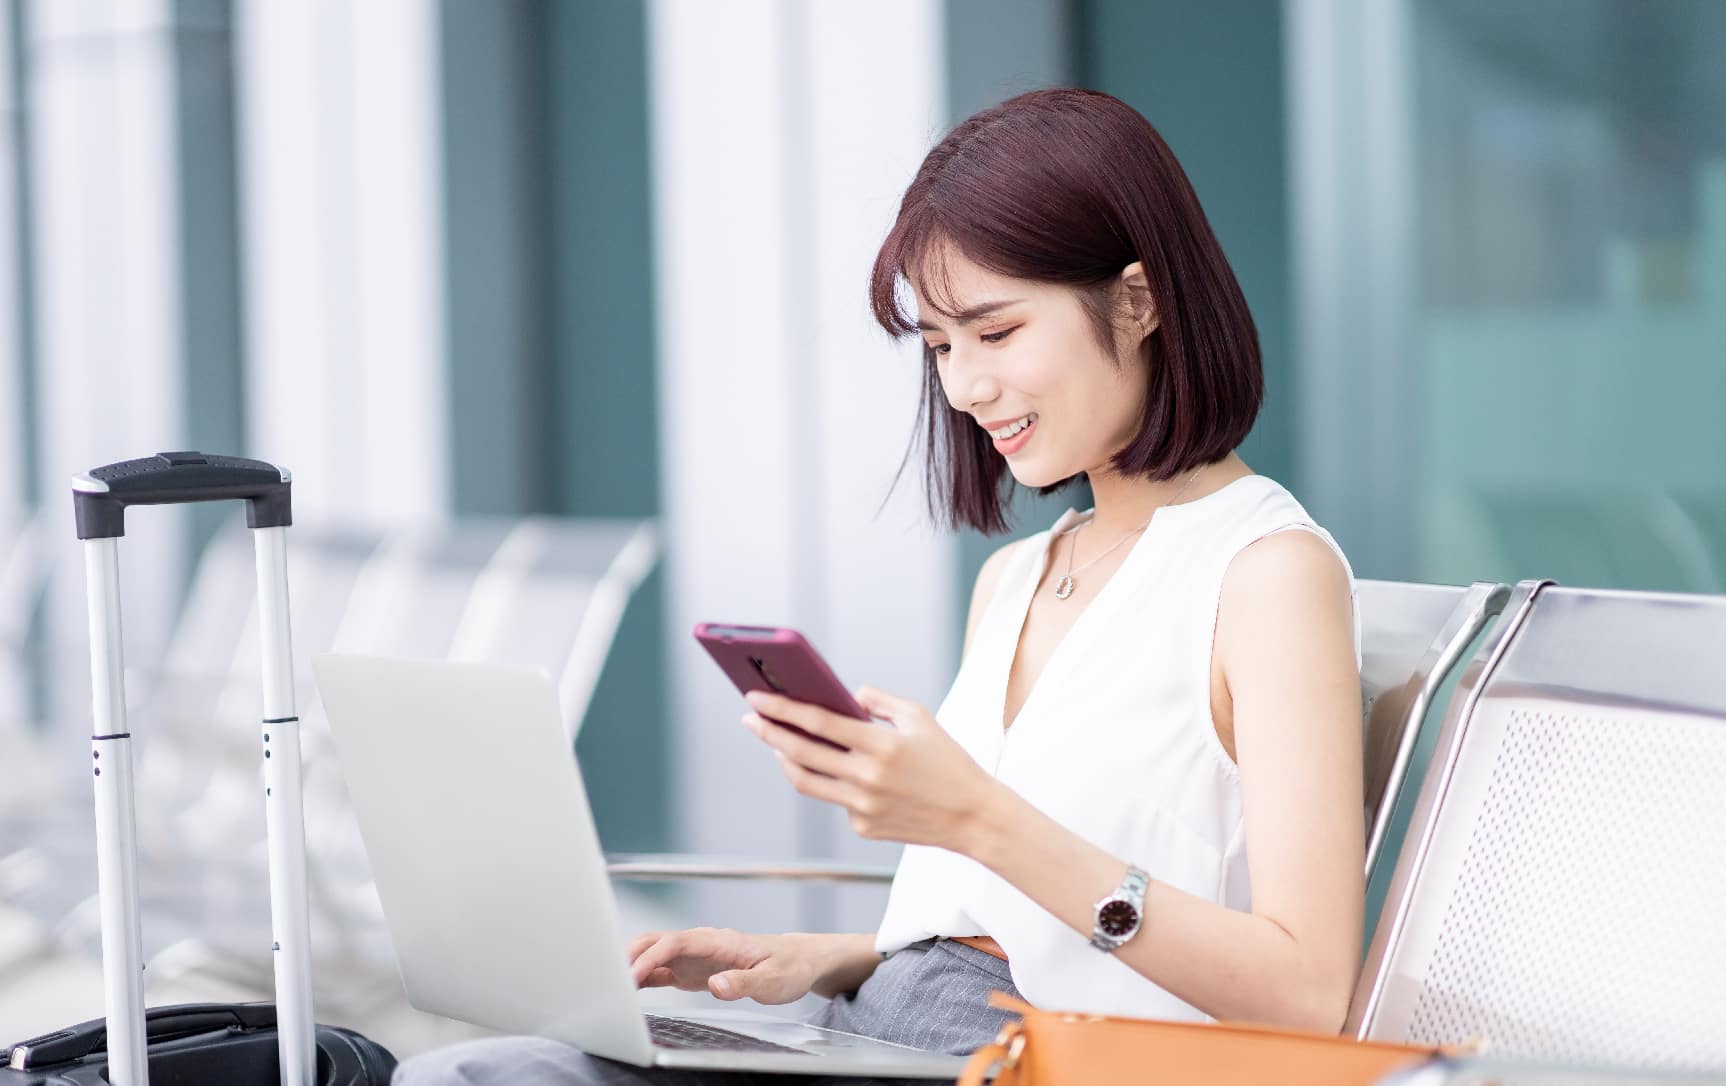 Woman sitting on workplace in front of laptop looking into her mobile phone